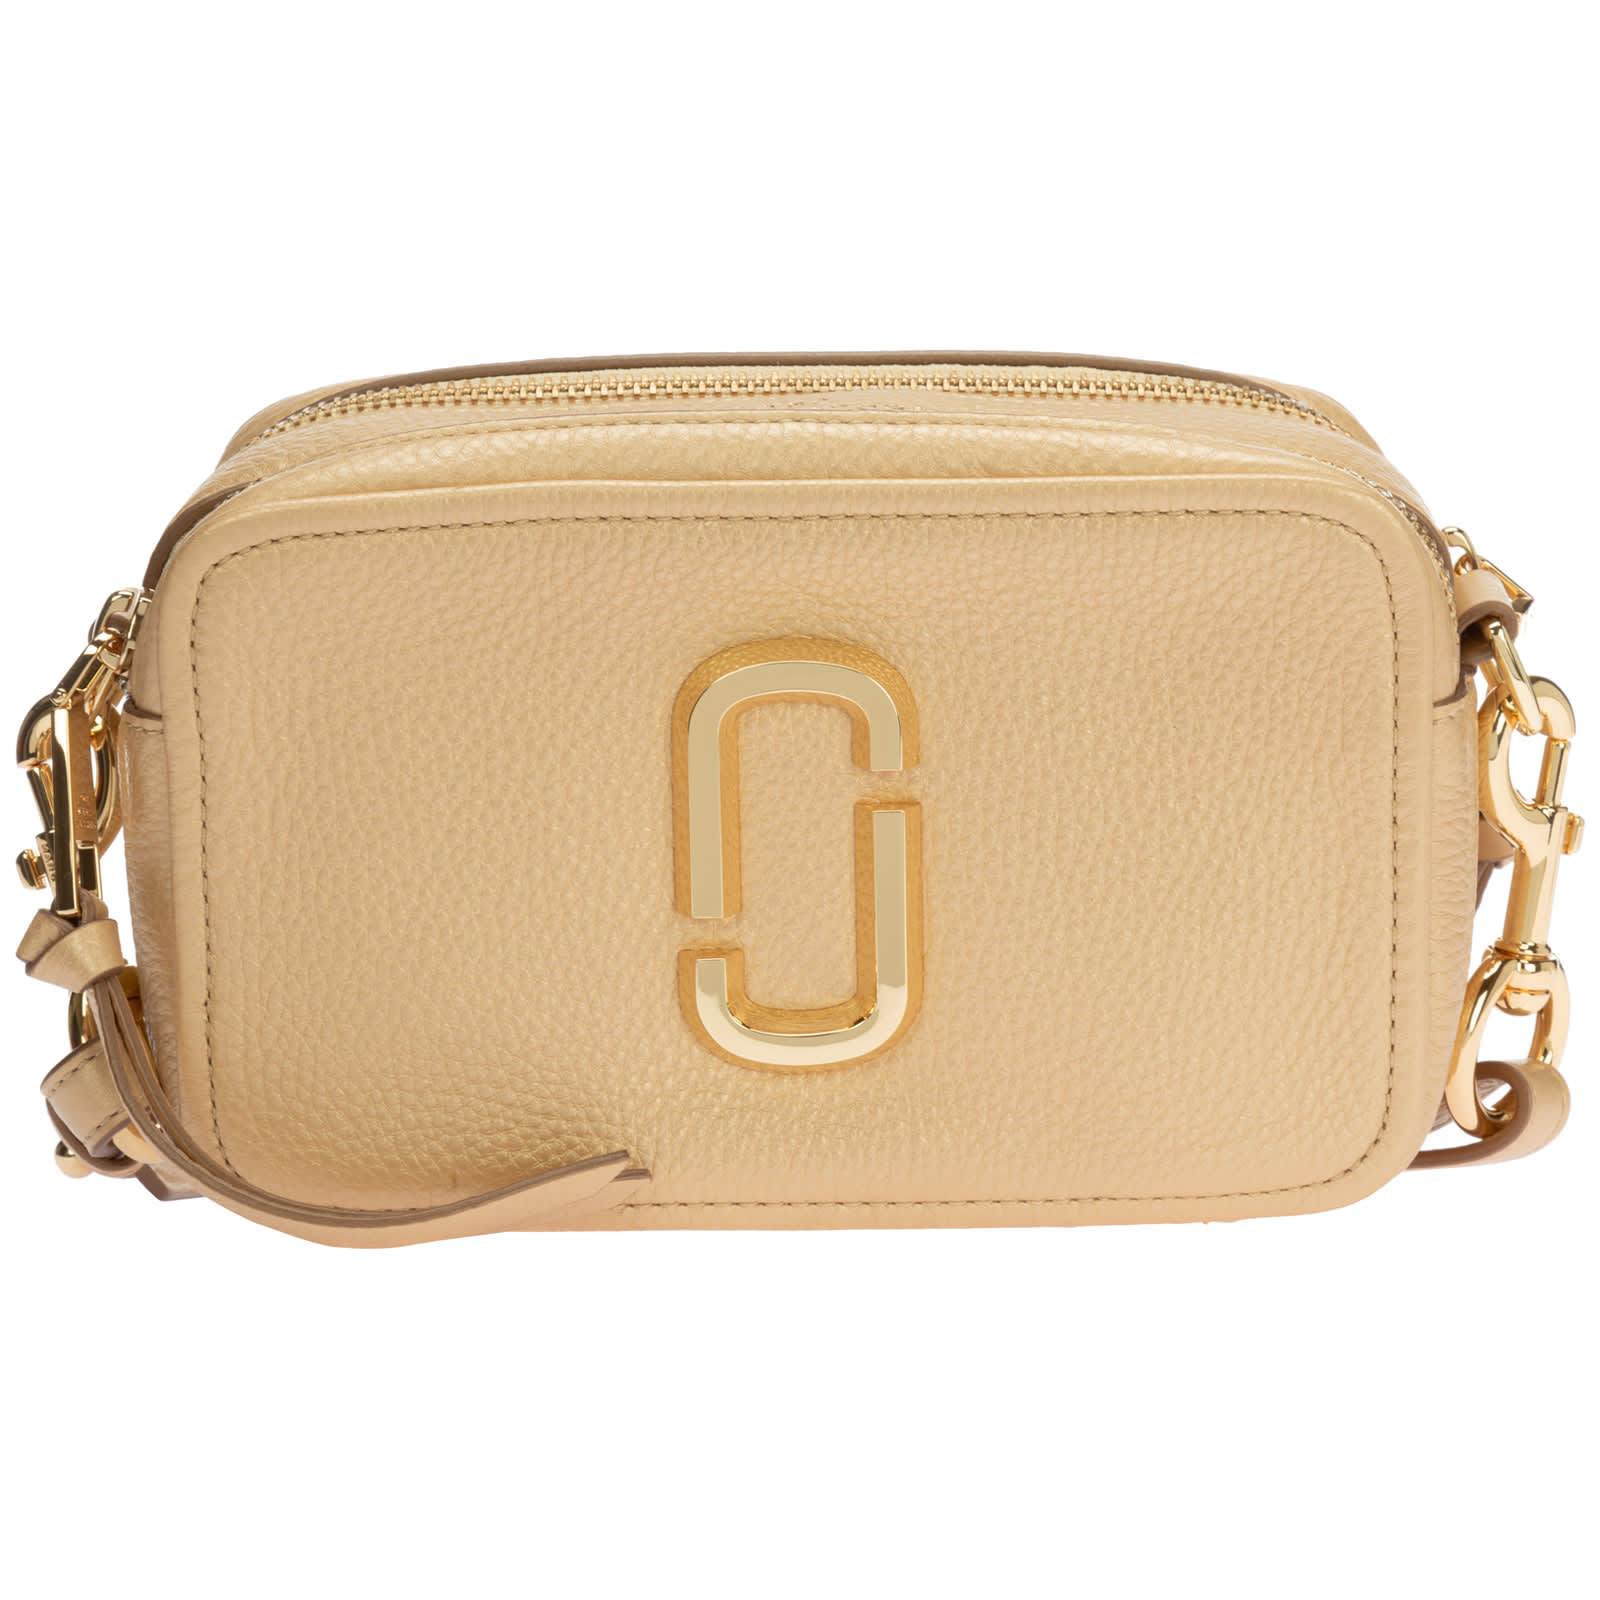 MARC JACOBS THE SOFTSHOT PEARLIZED CROSSBODY BAGS,11520480